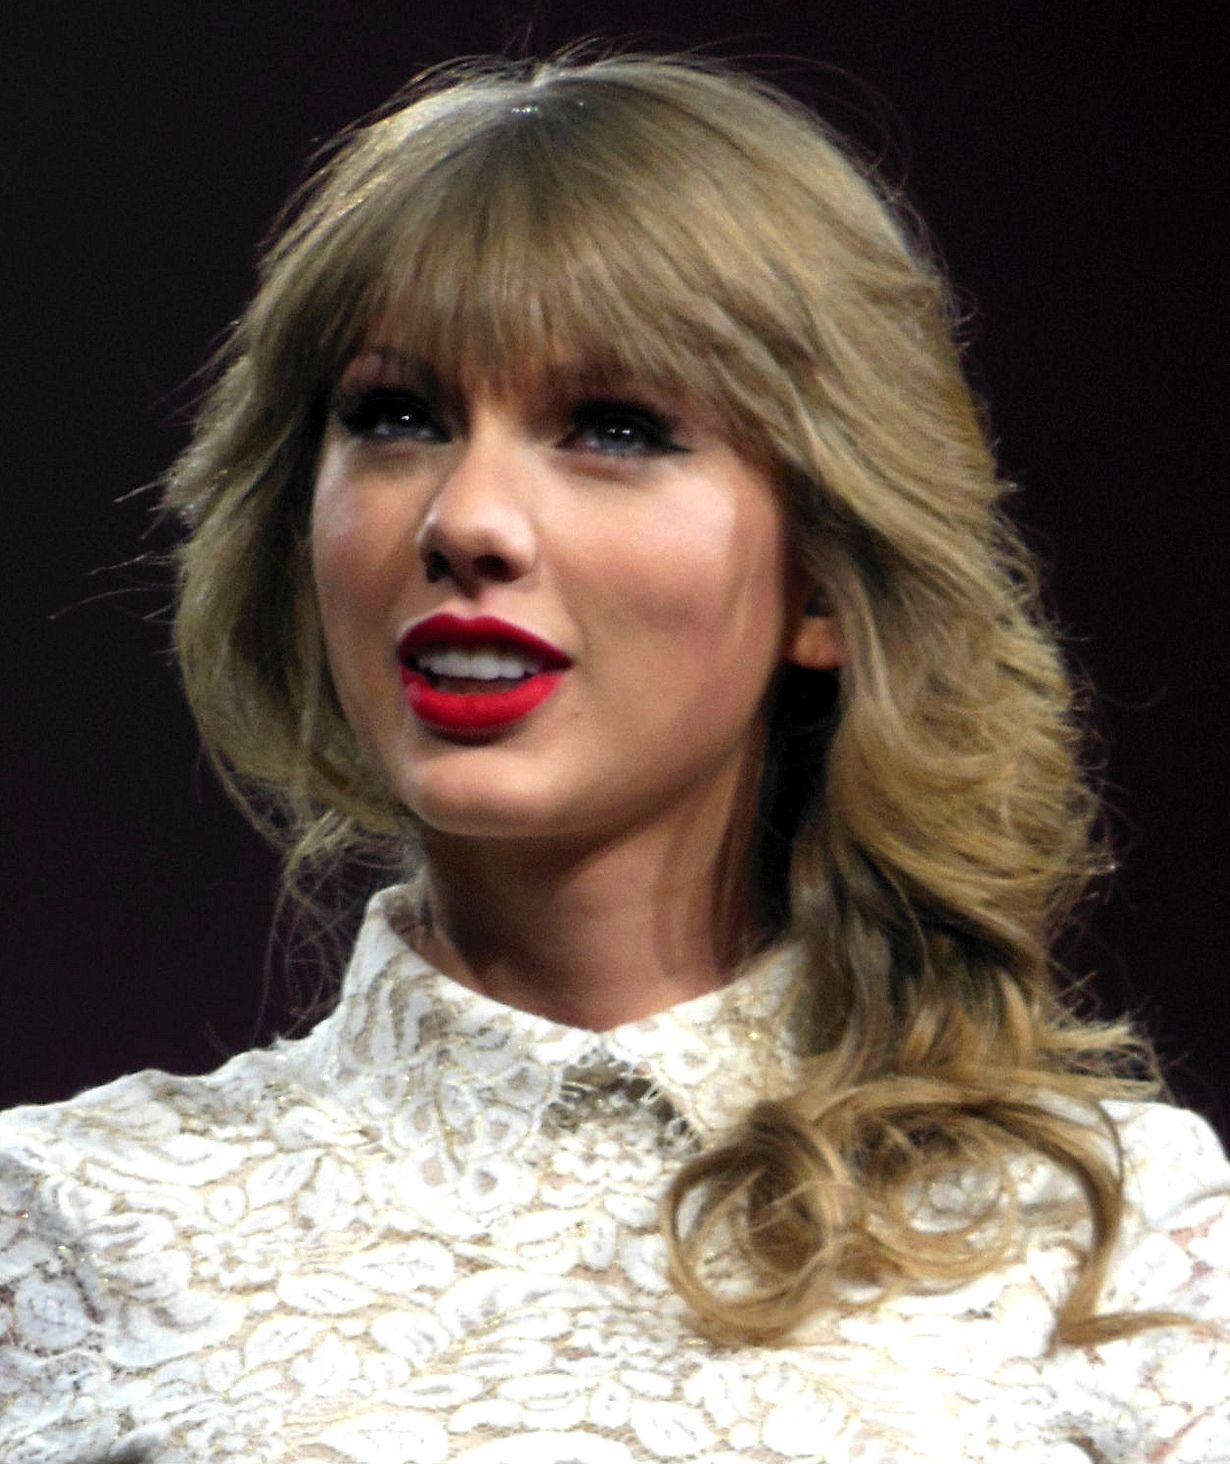 taylor swift funny quotes about